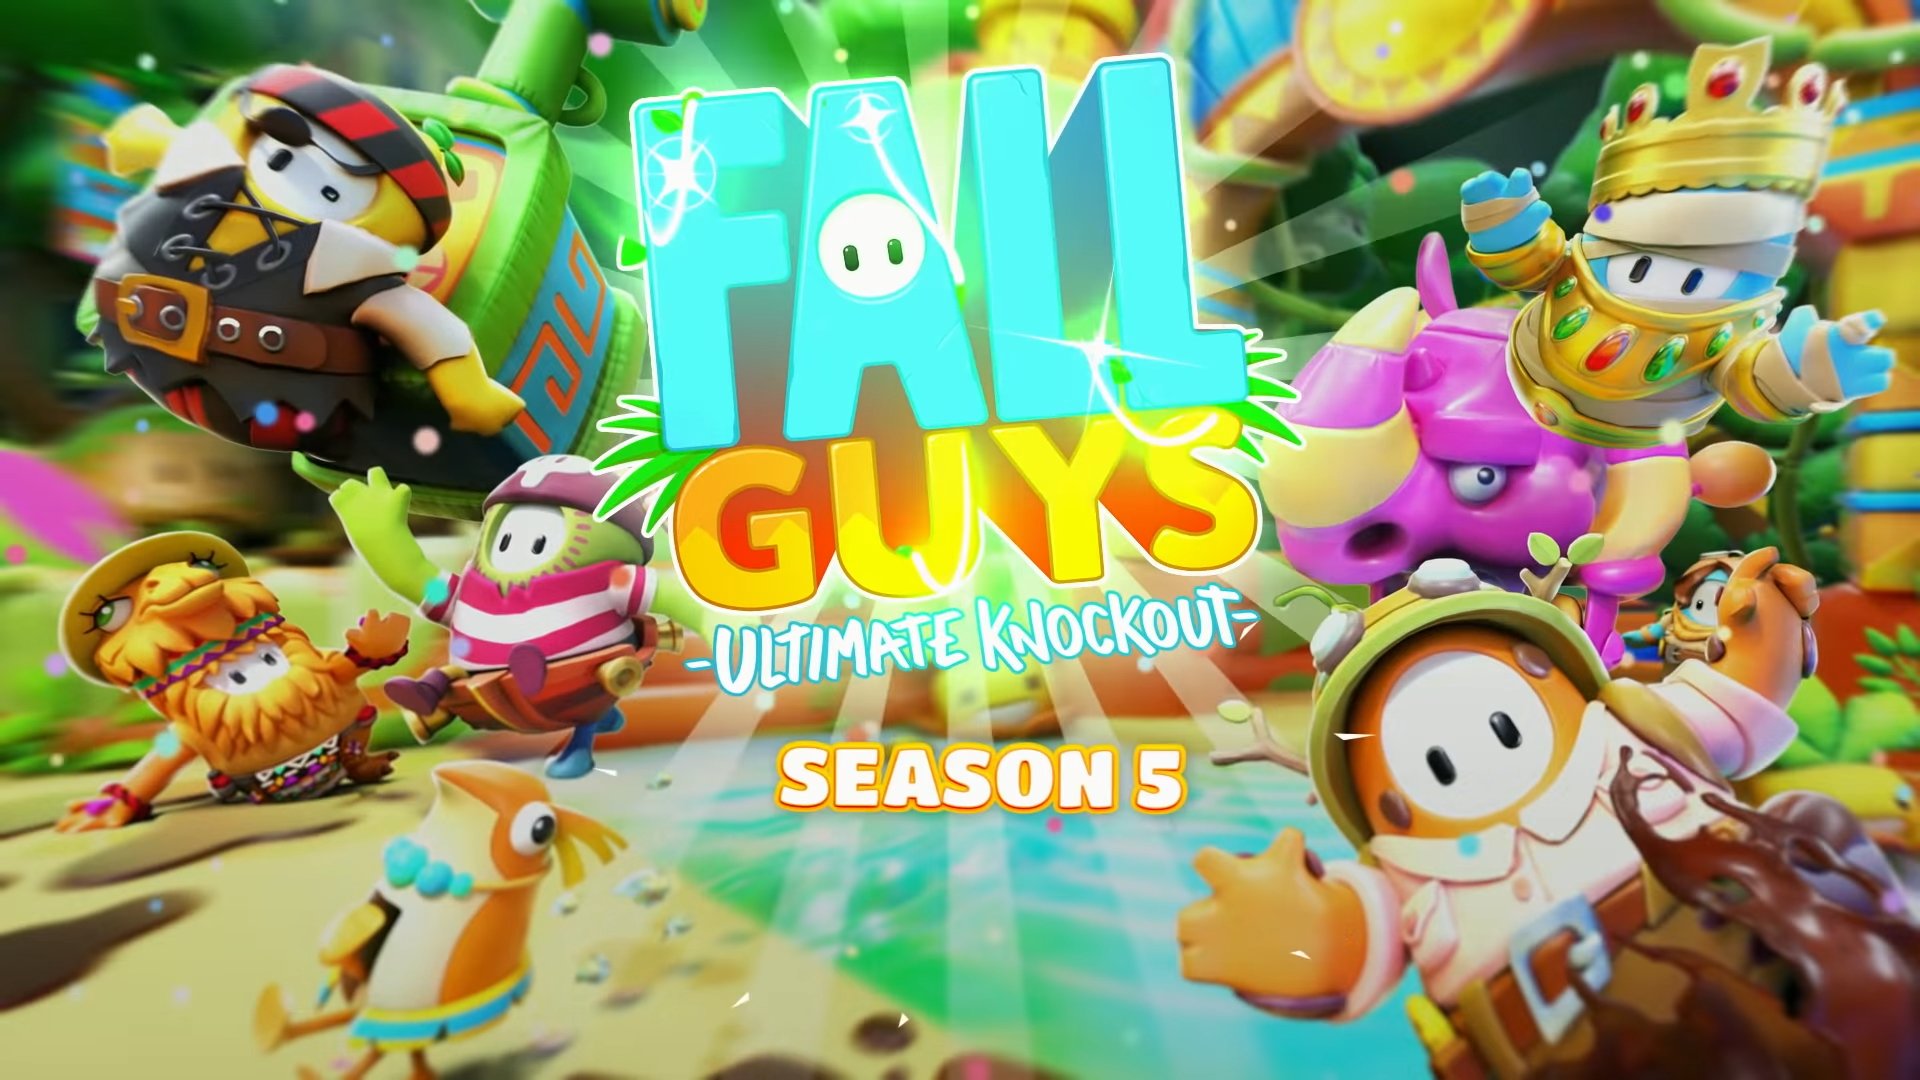 Fall Guys Season 5 Coming July 20 With New Rounds and Limited Time Events